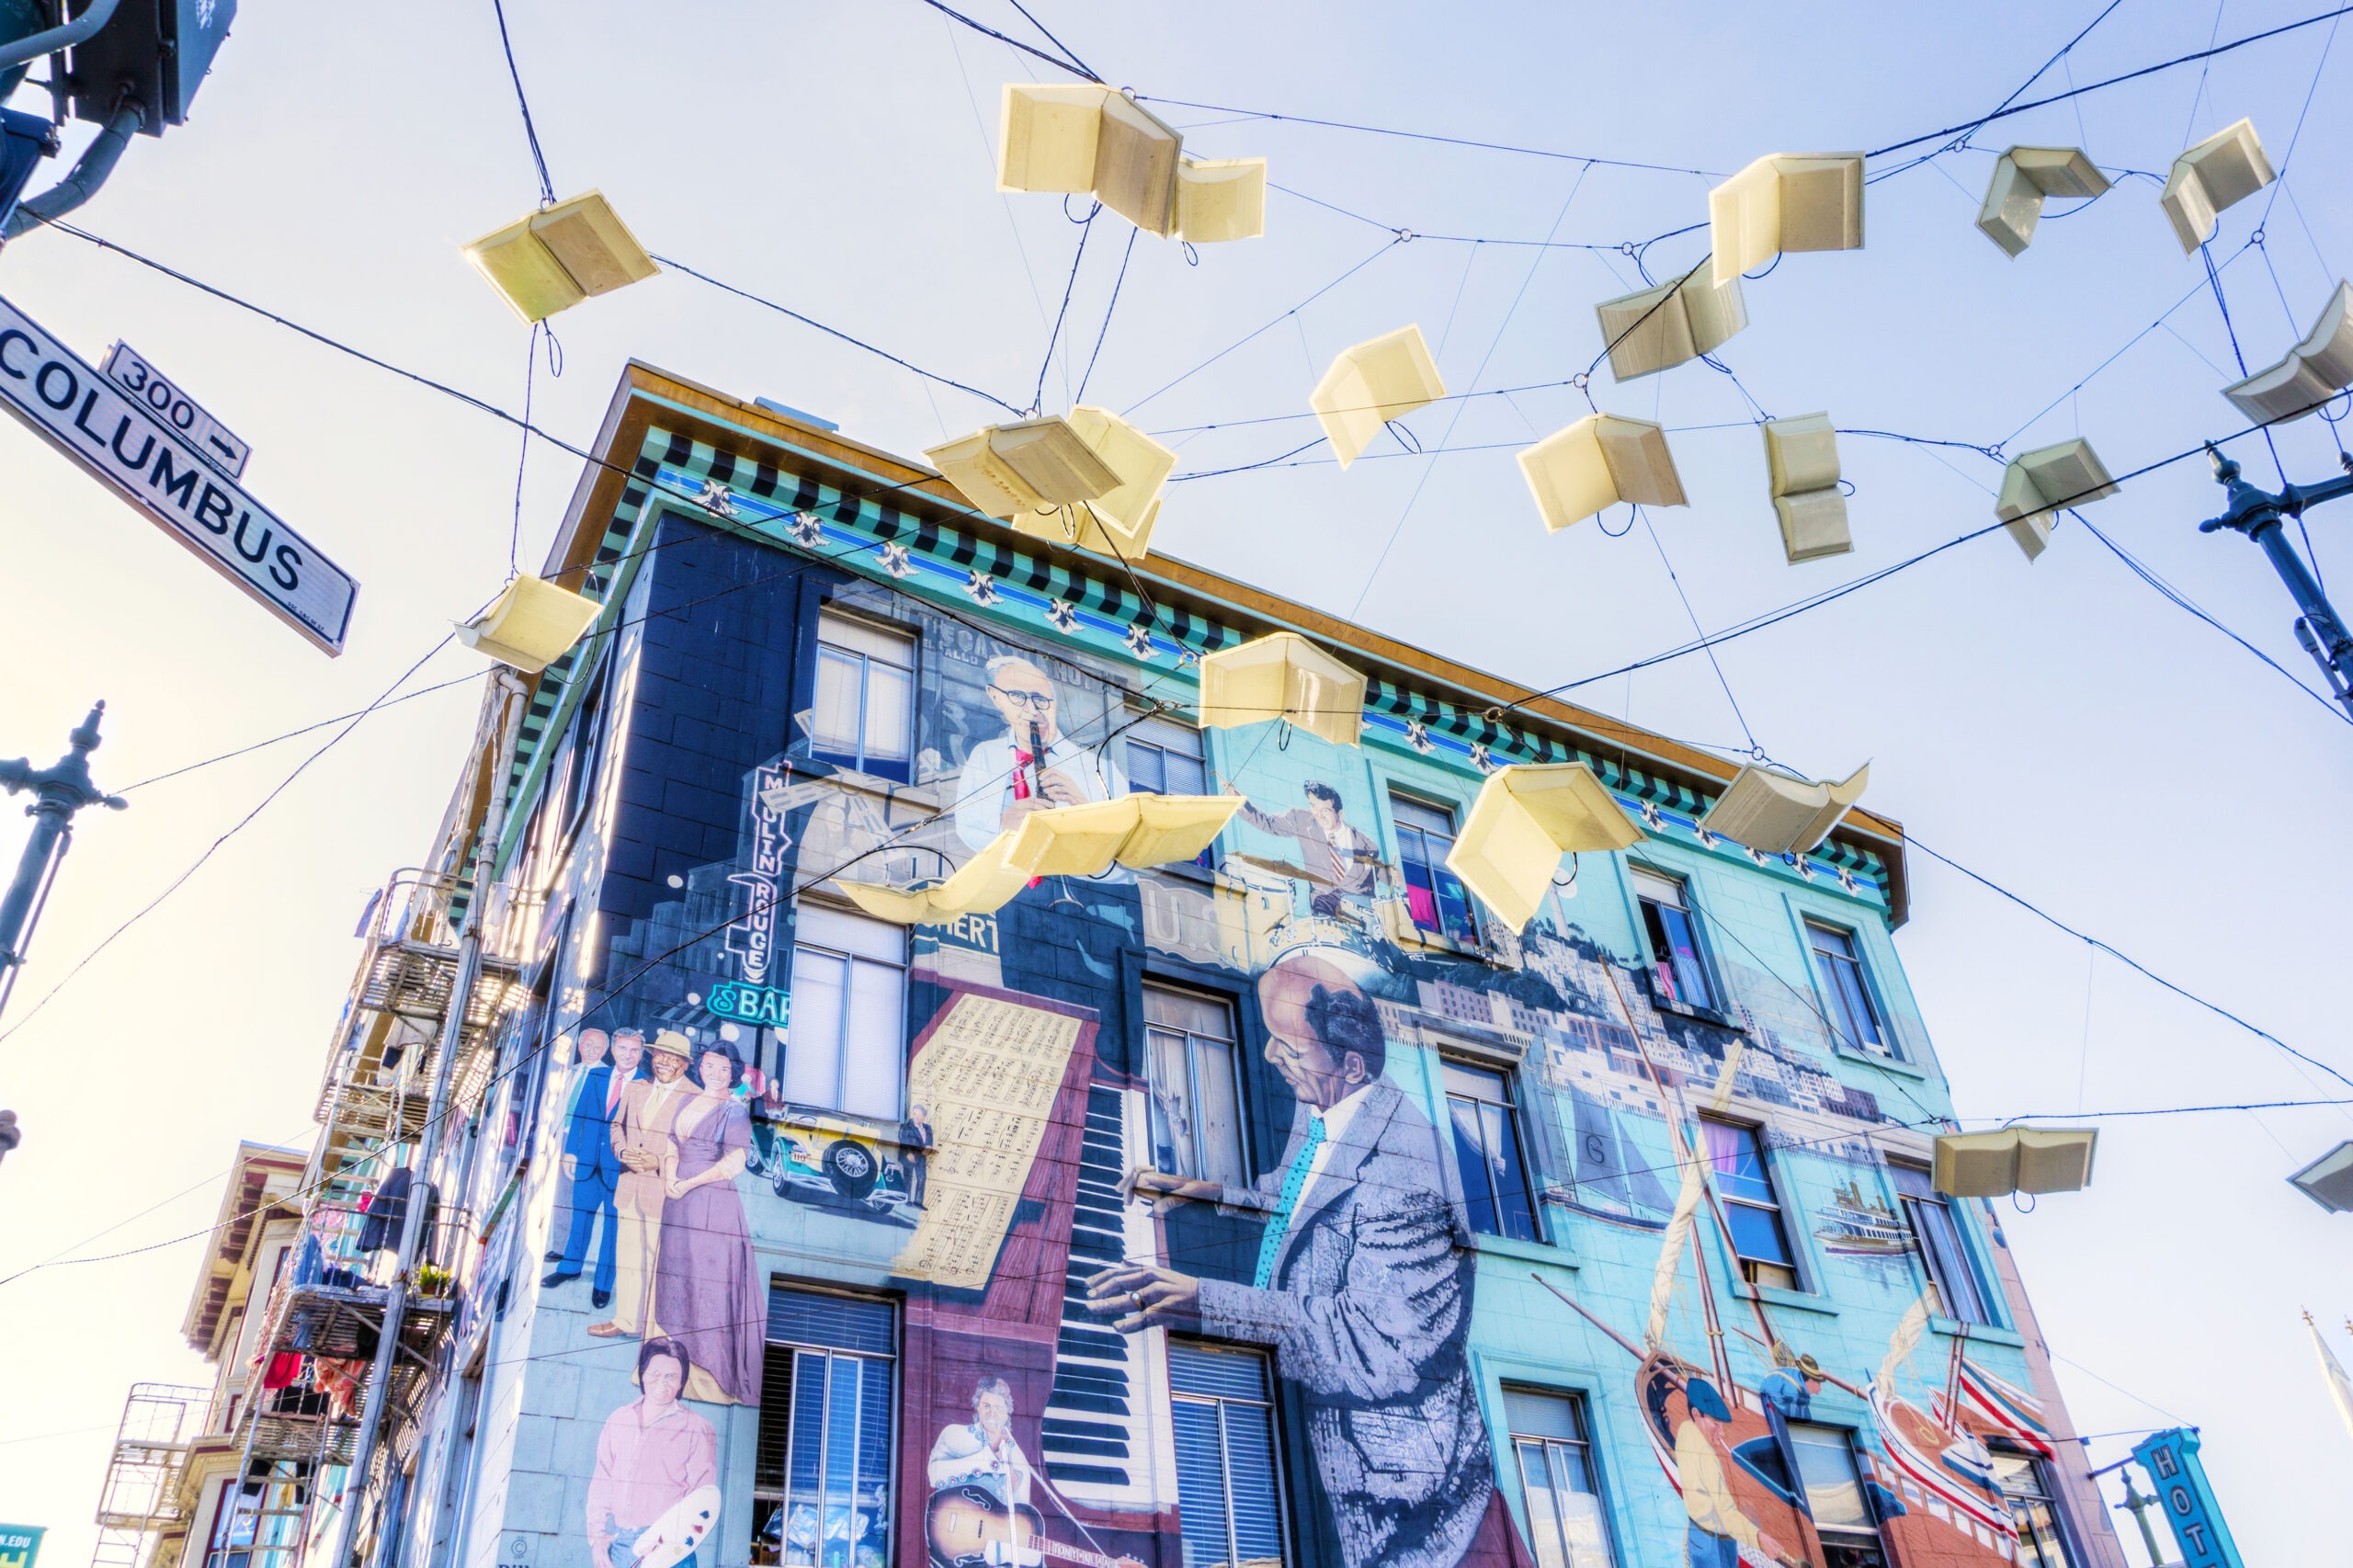 Street lamps in the form of books in North Beach, San Francisco